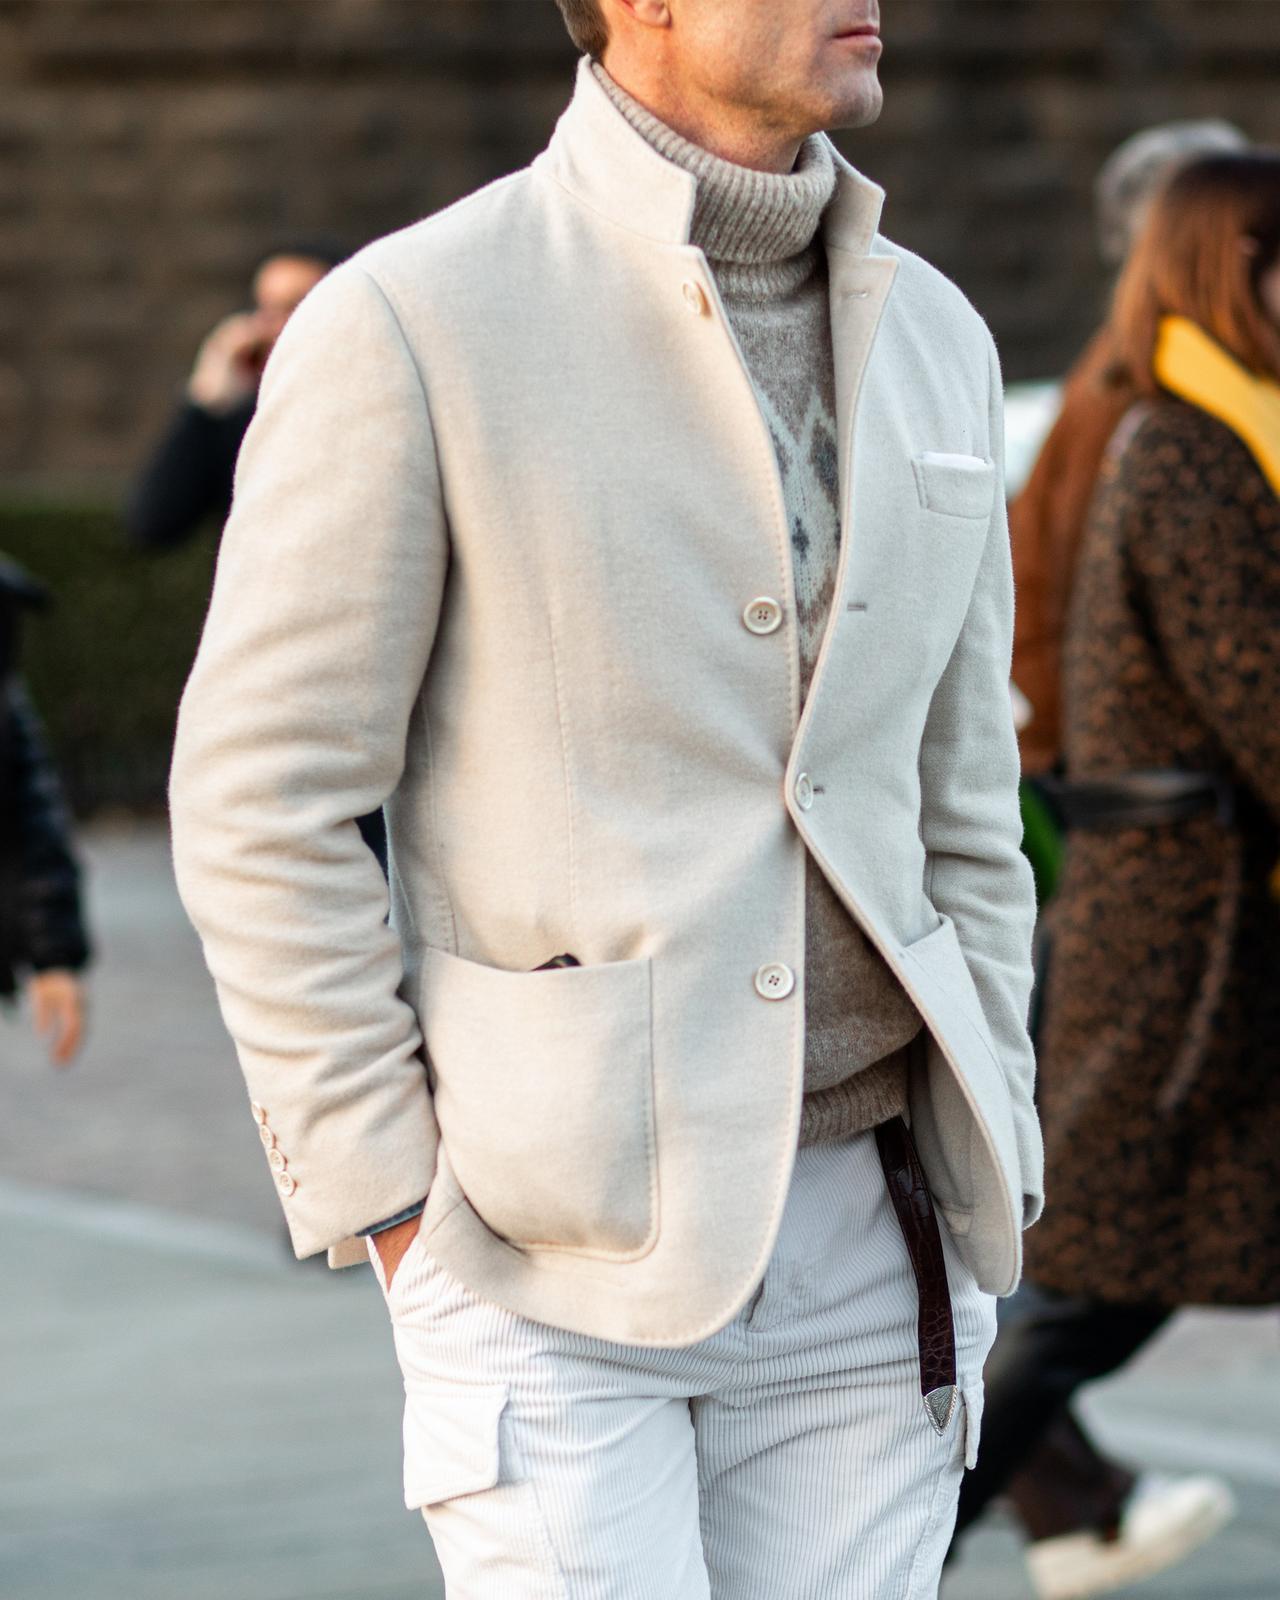 A man in a white jacket and white pants walking down a street